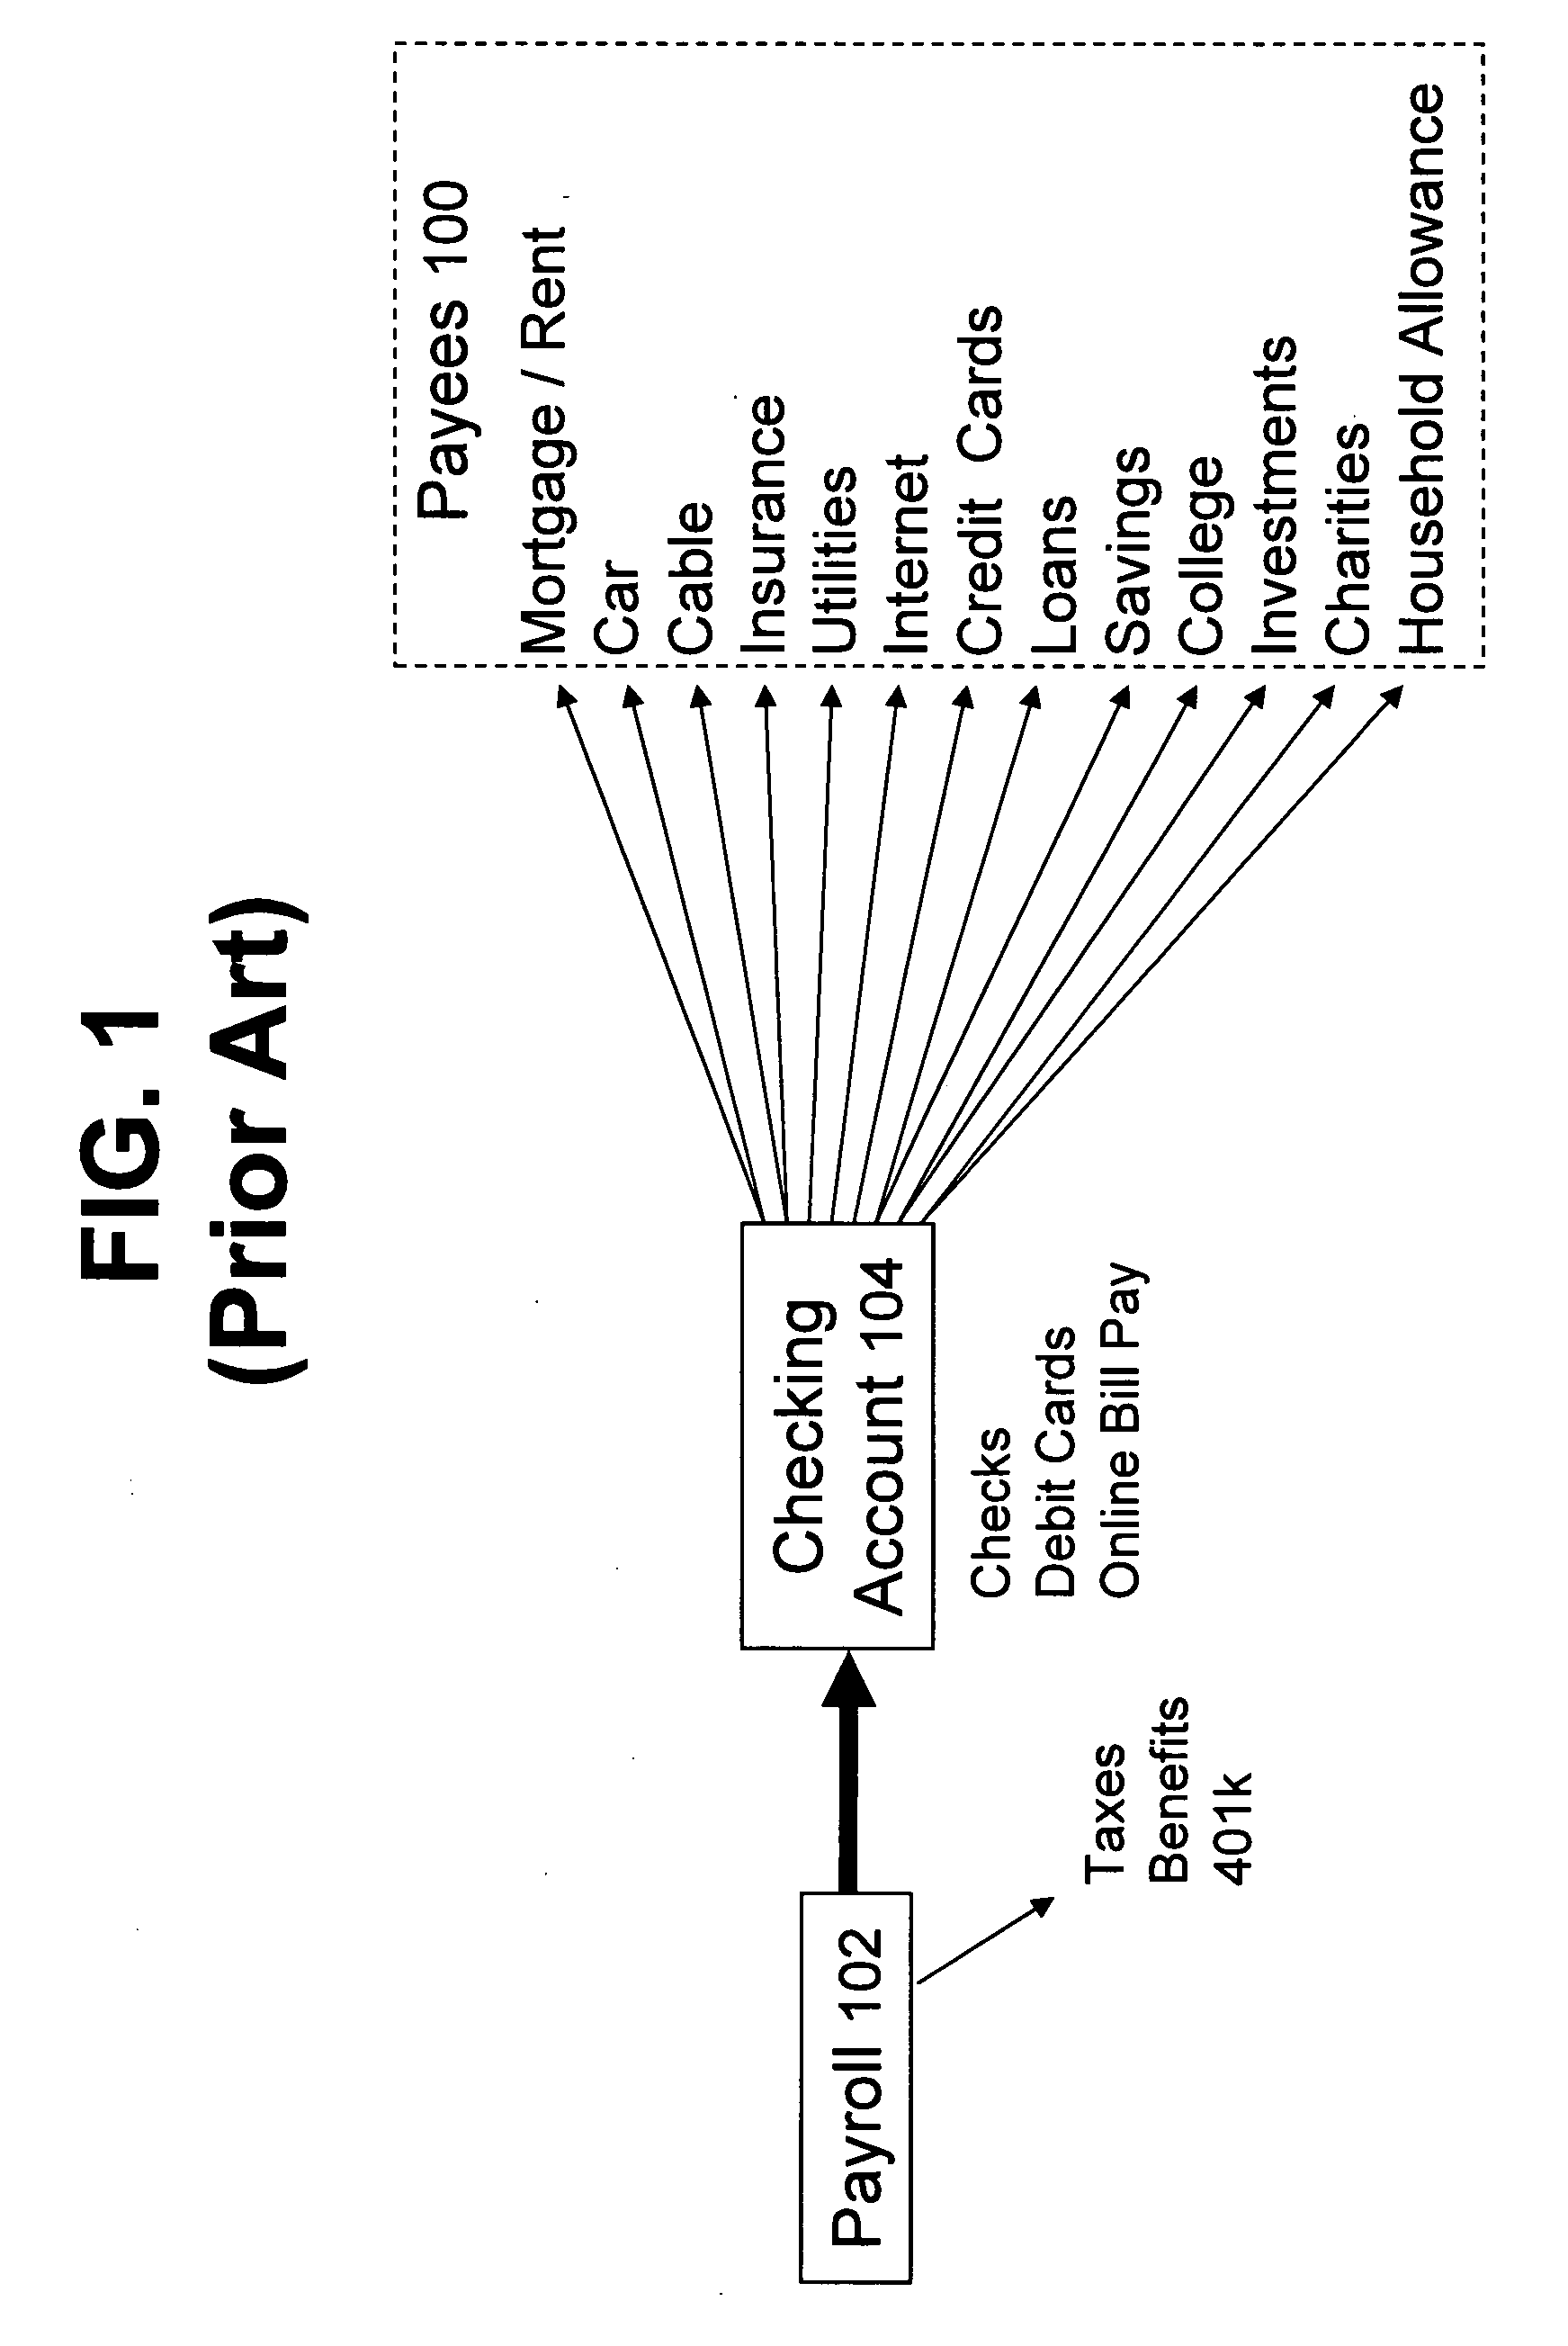 Advanced messaging system and method